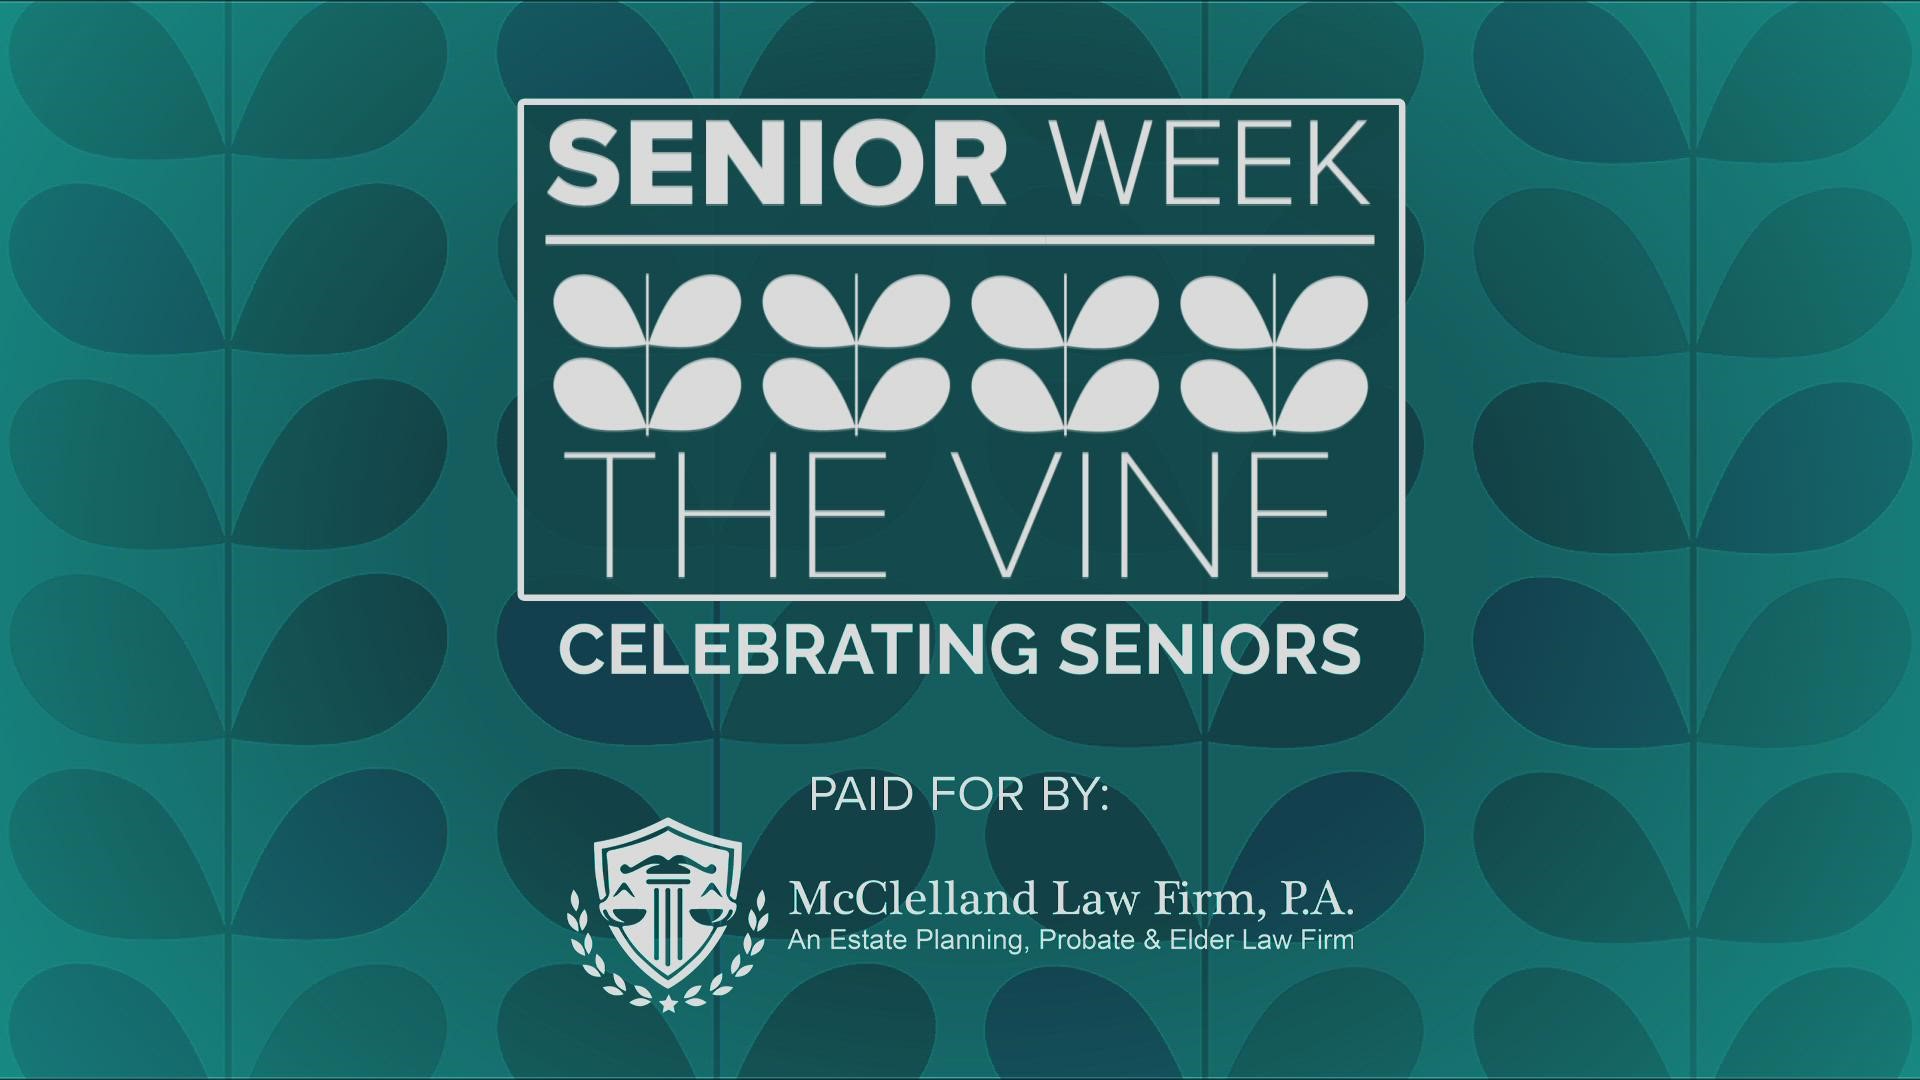 Celebrating Seniors brought to you by McClellend Law Firm